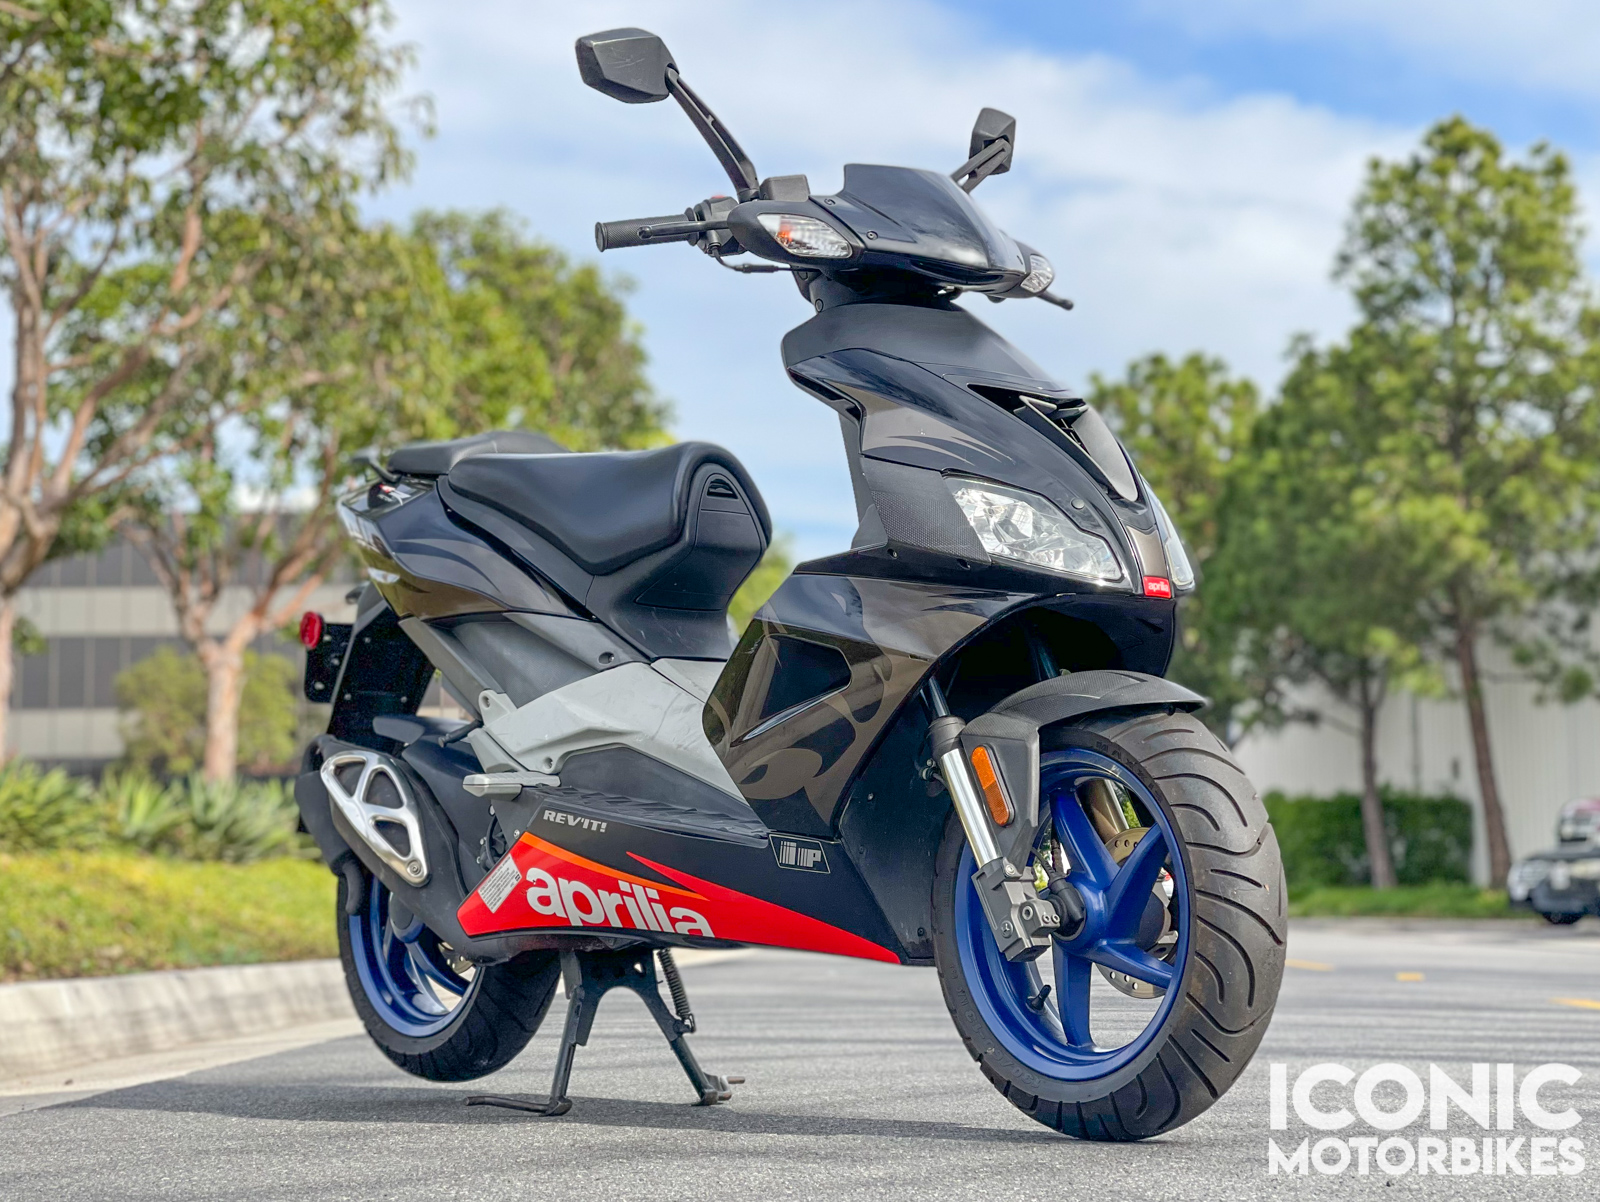 https://iconicmotorbikeauctions.com/wp-content/uploads/2022/01/Aprilia-SR50-R-Factory-Front-Right-Featured.jpg